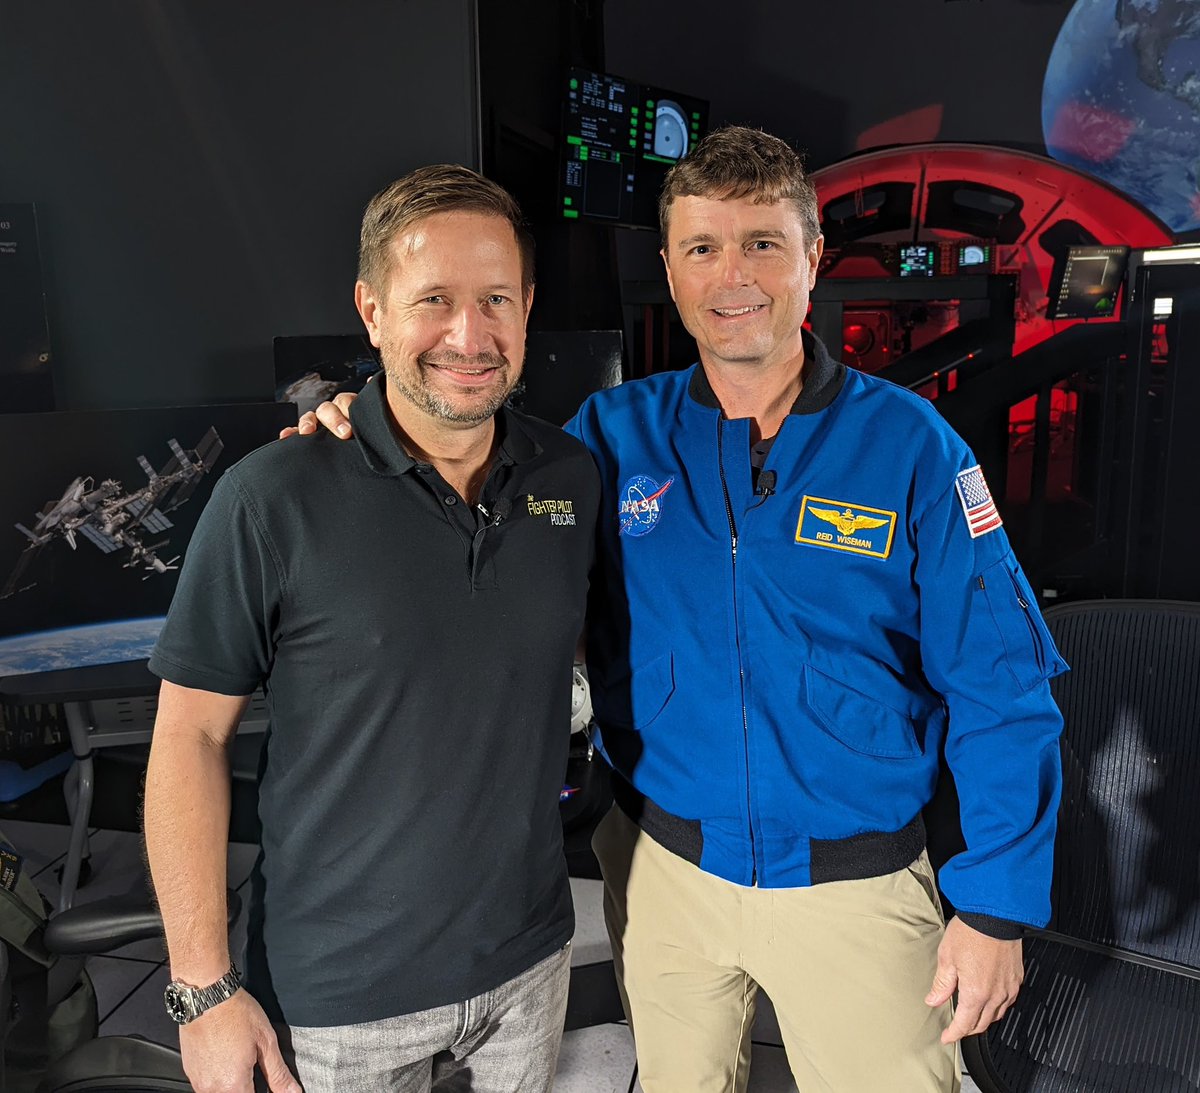 Caught up with @astro_reid telling thrilling tales of the #tomcat, #superhornet, and combat to his experiences on ISS and @NASAArtemis space exploration. It’s a fun and informative conversation!

#SpaceExploration #Artemis #NASA #flynavy #usnavy